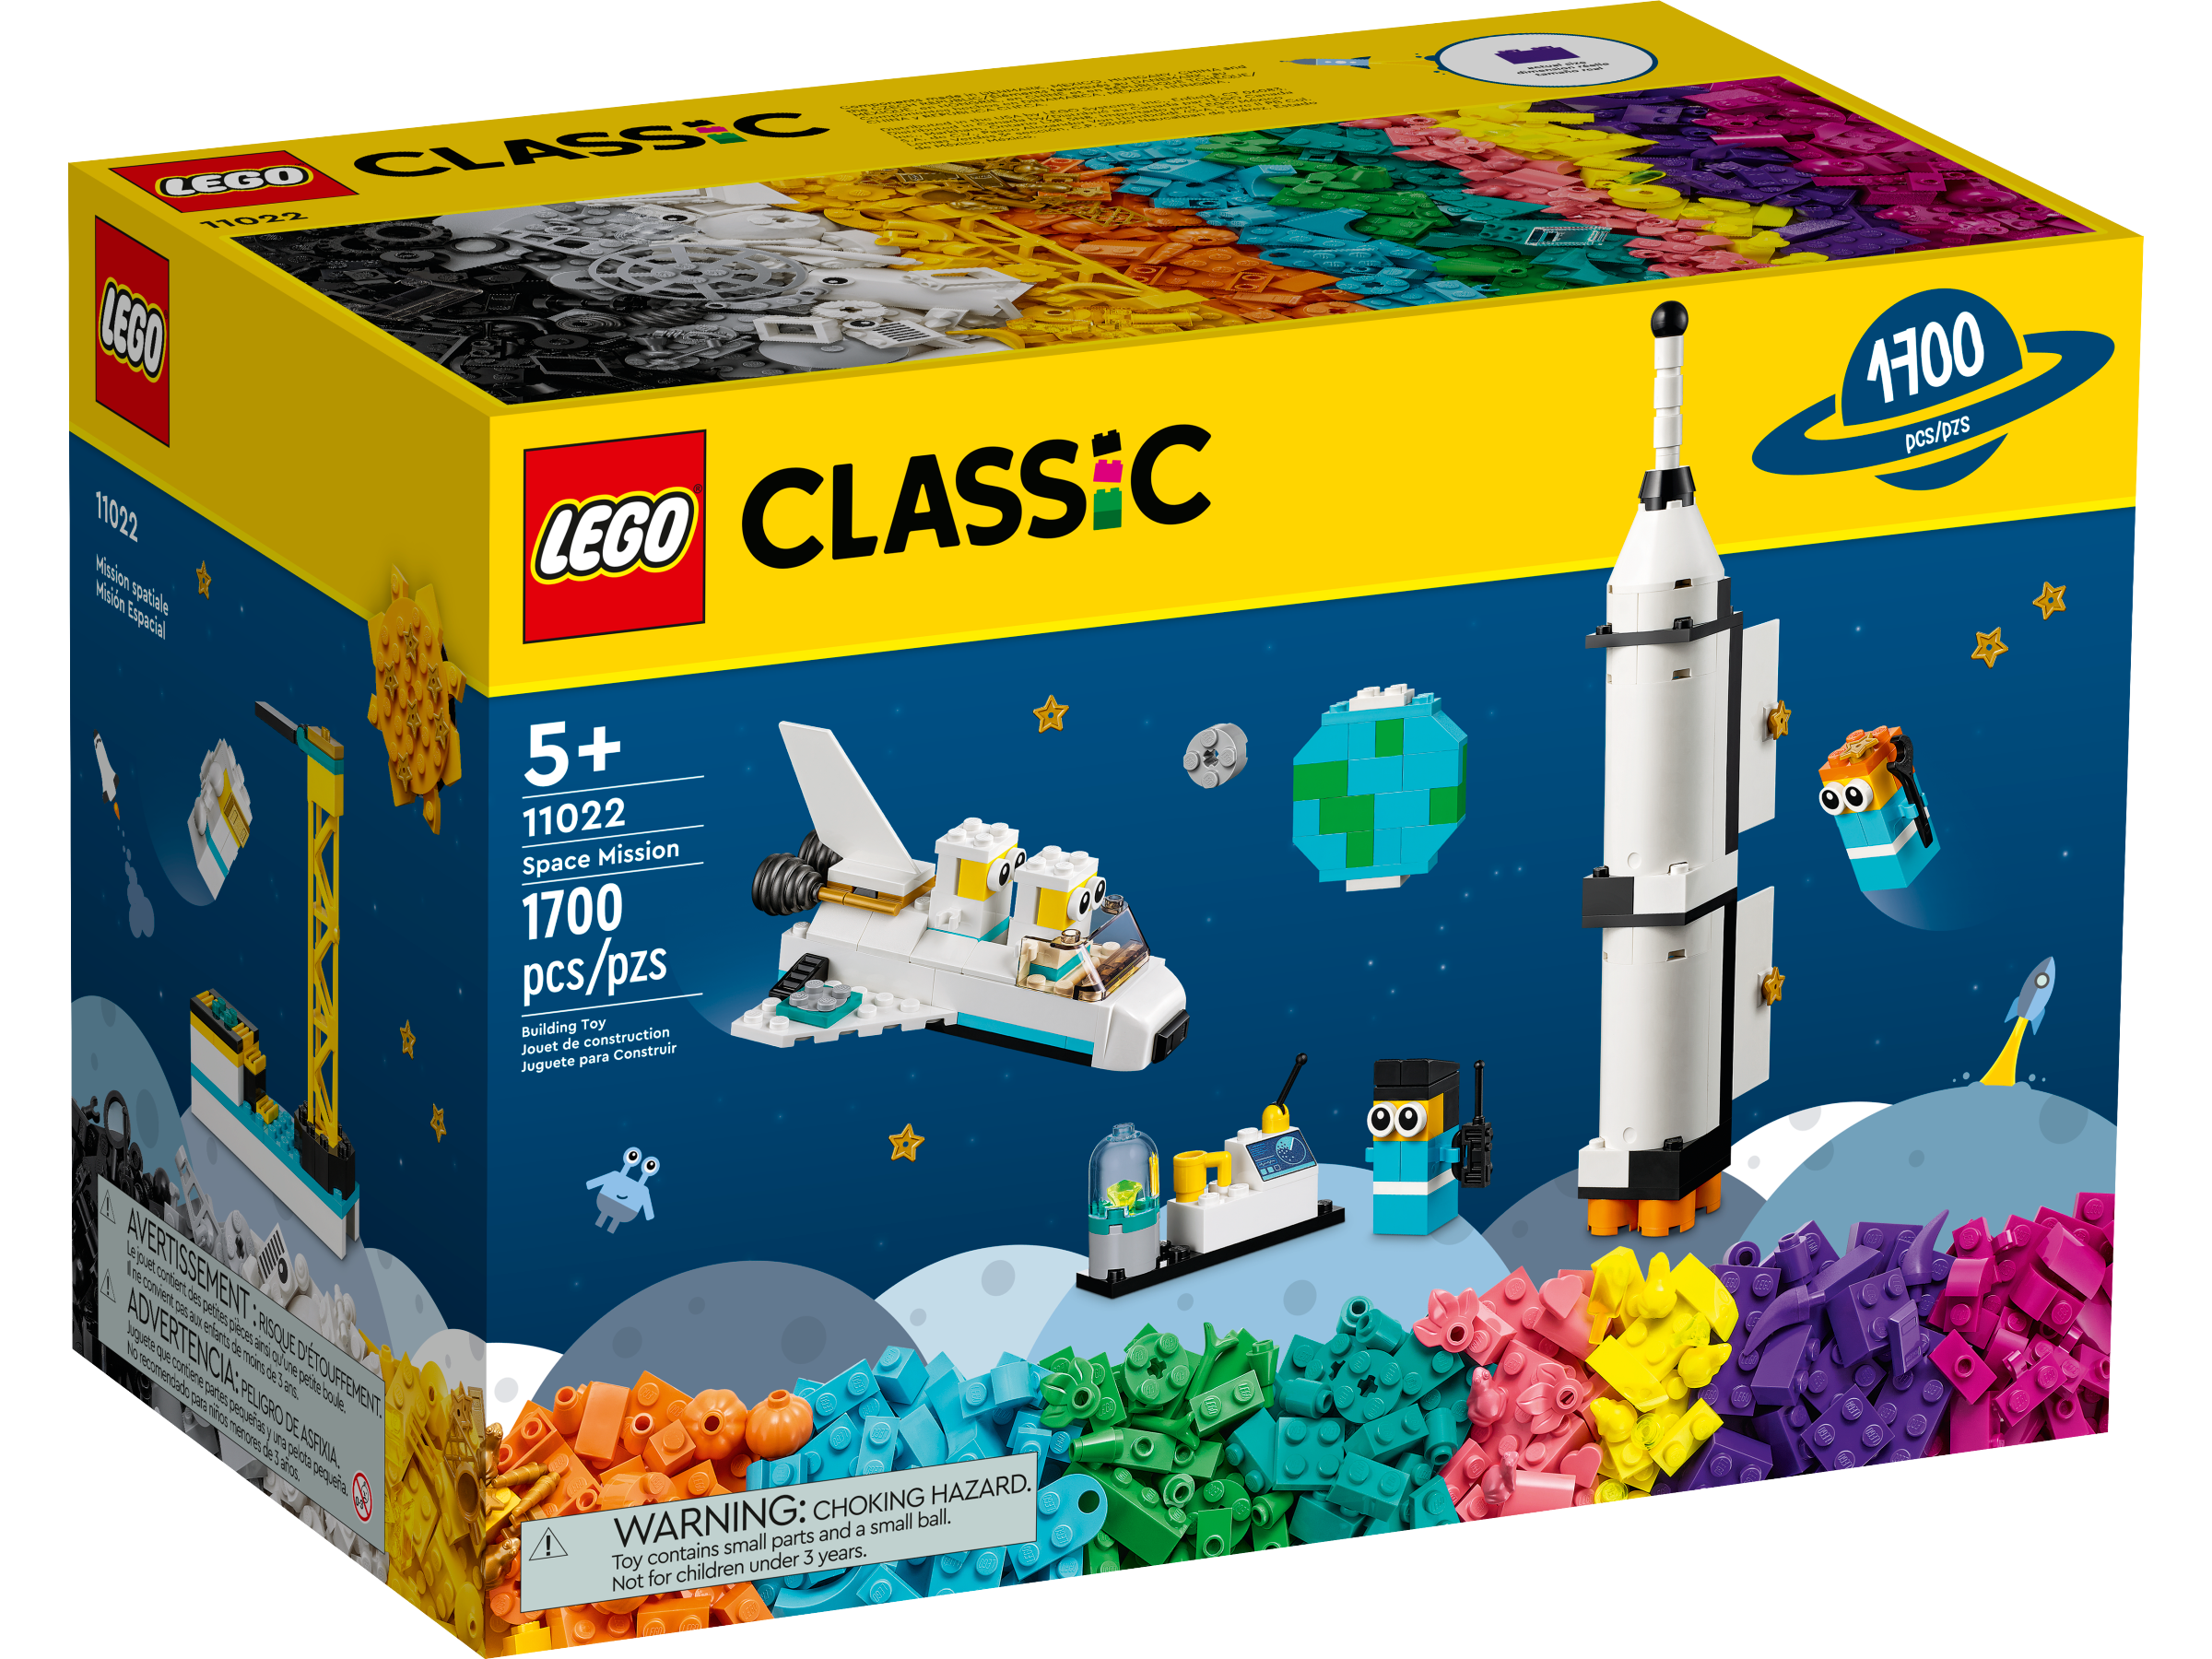 Space Mission 11022, Classic